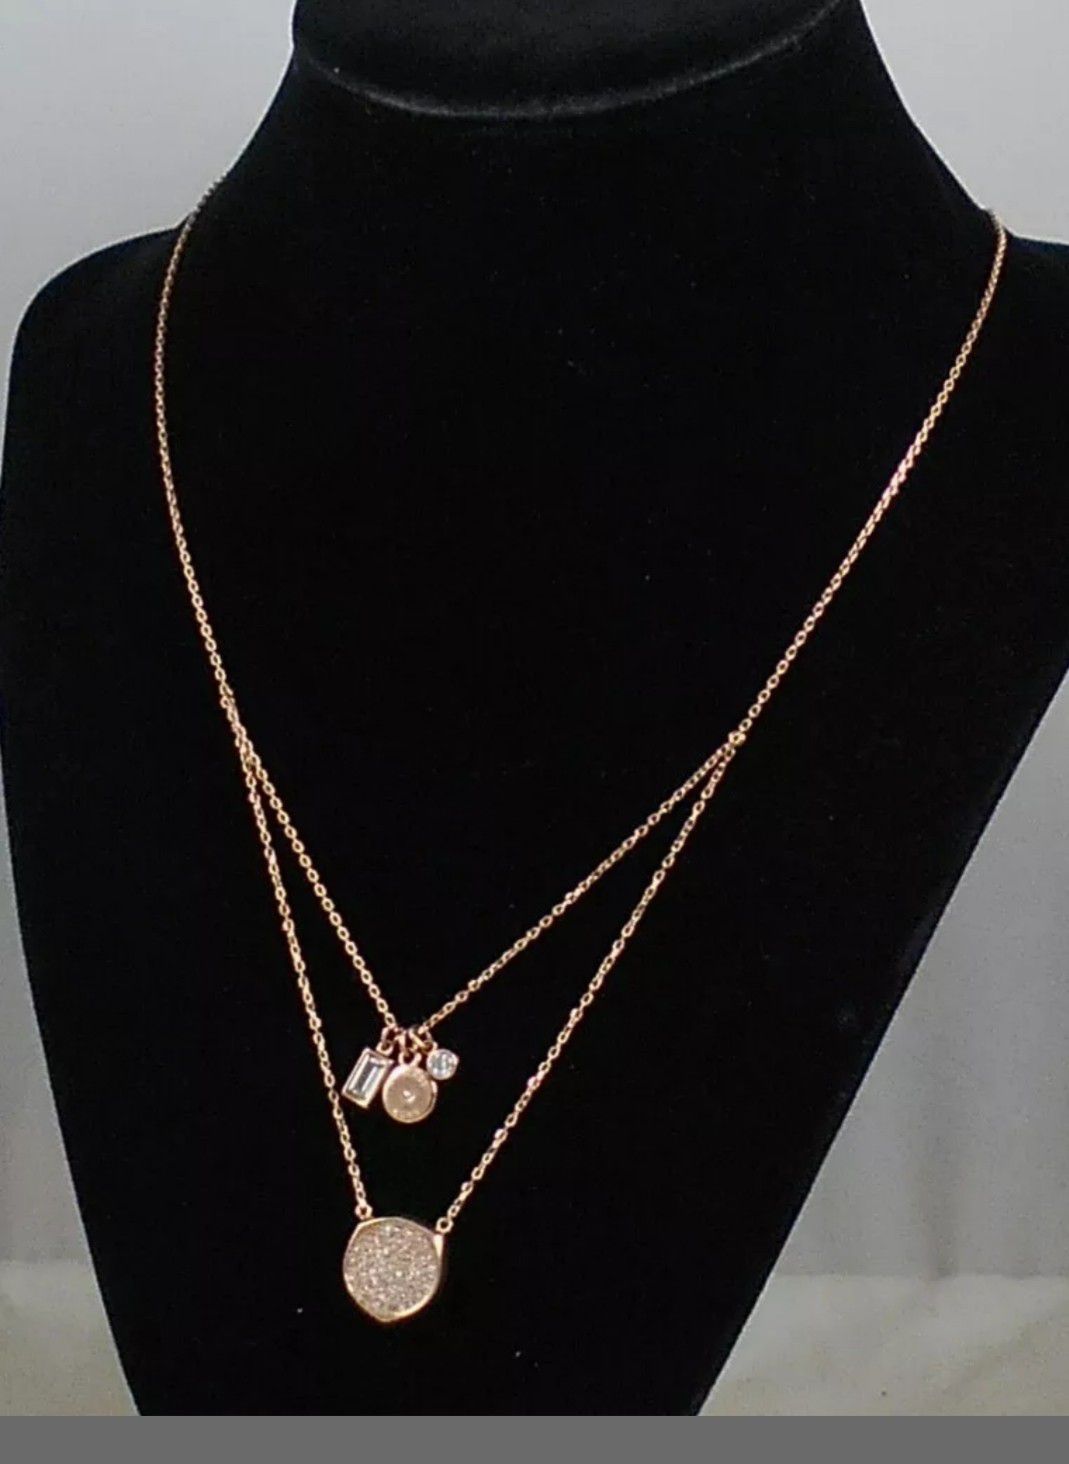 Brand new Michael Kors Rose Gold BEYOND BRILLIANT Pave' Disc Charm Necklace